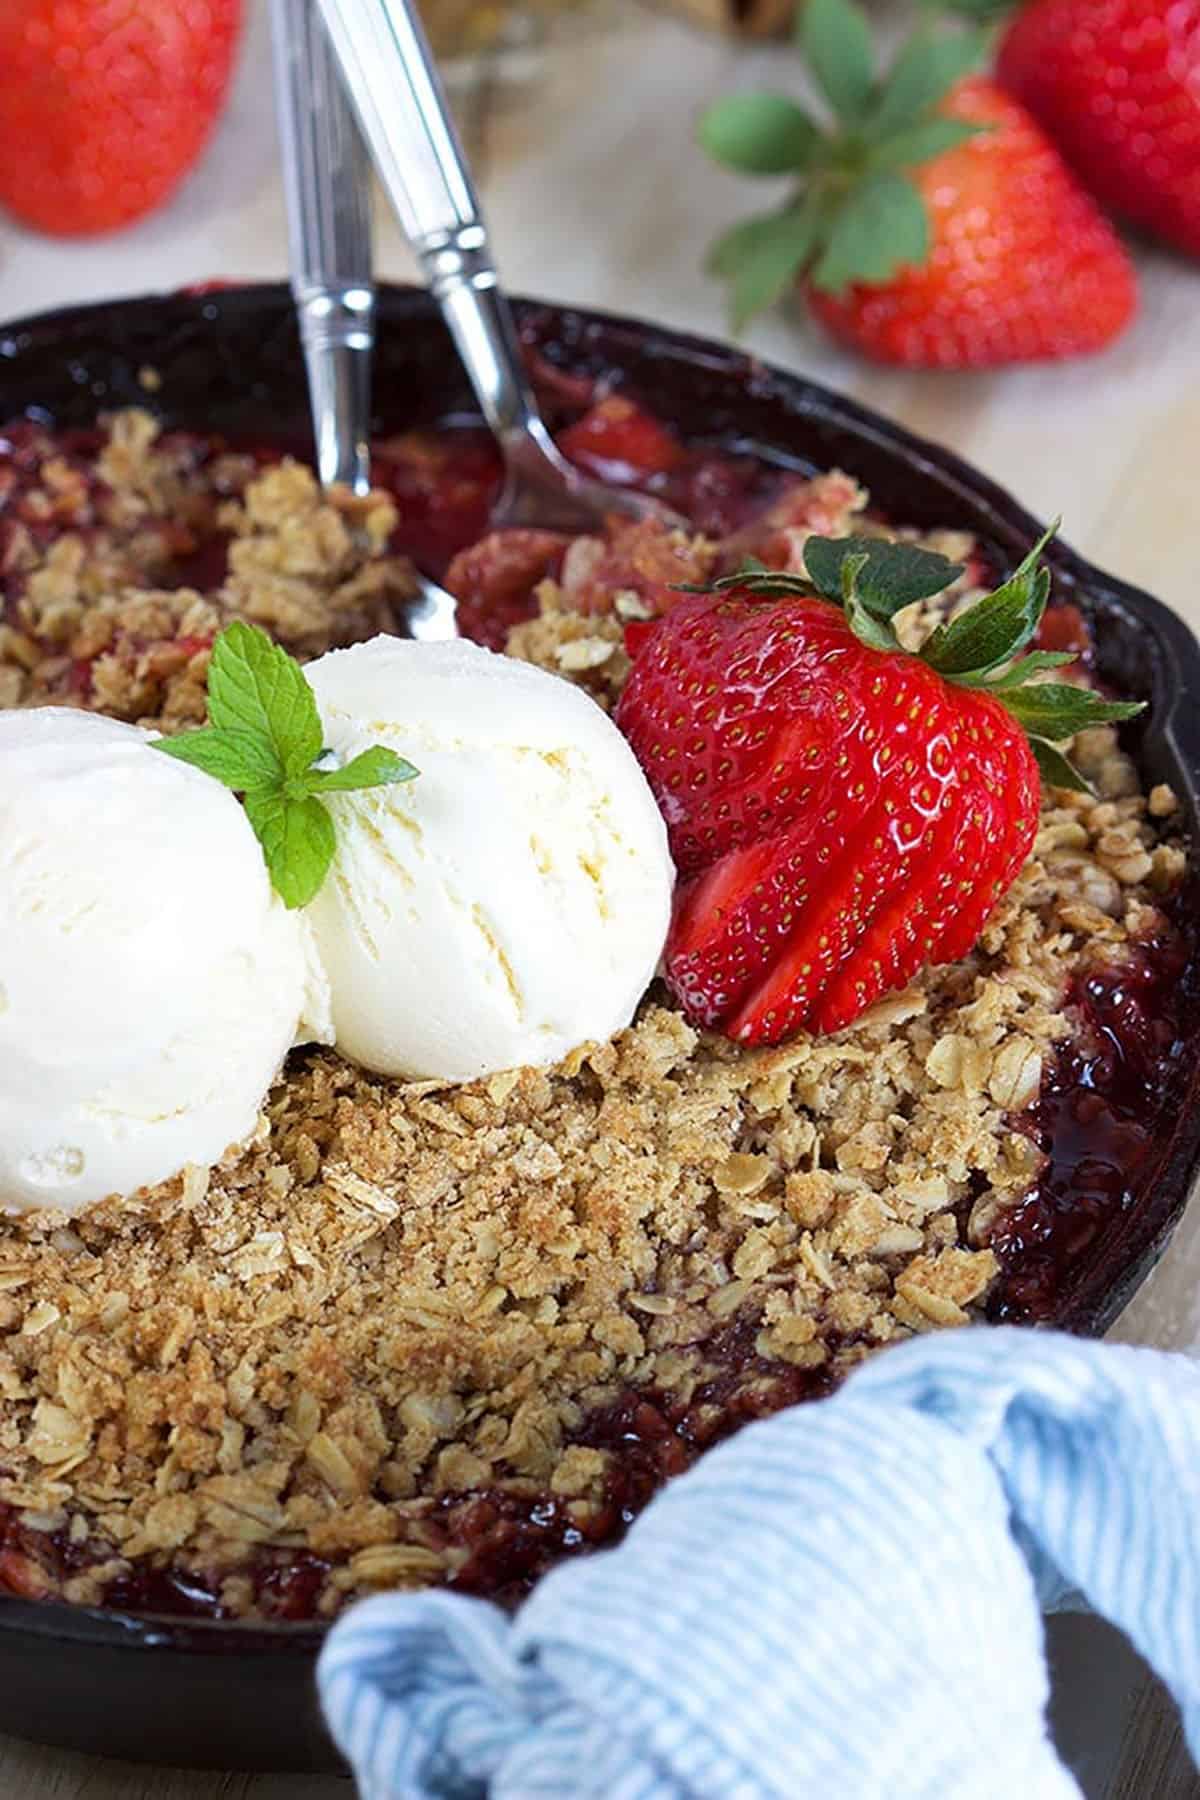 Strawberry Rhubarb Crisp in a skillet with a light blue towel tied to the handle. Two scoops of vanilla ice cream and a strawberry on top.